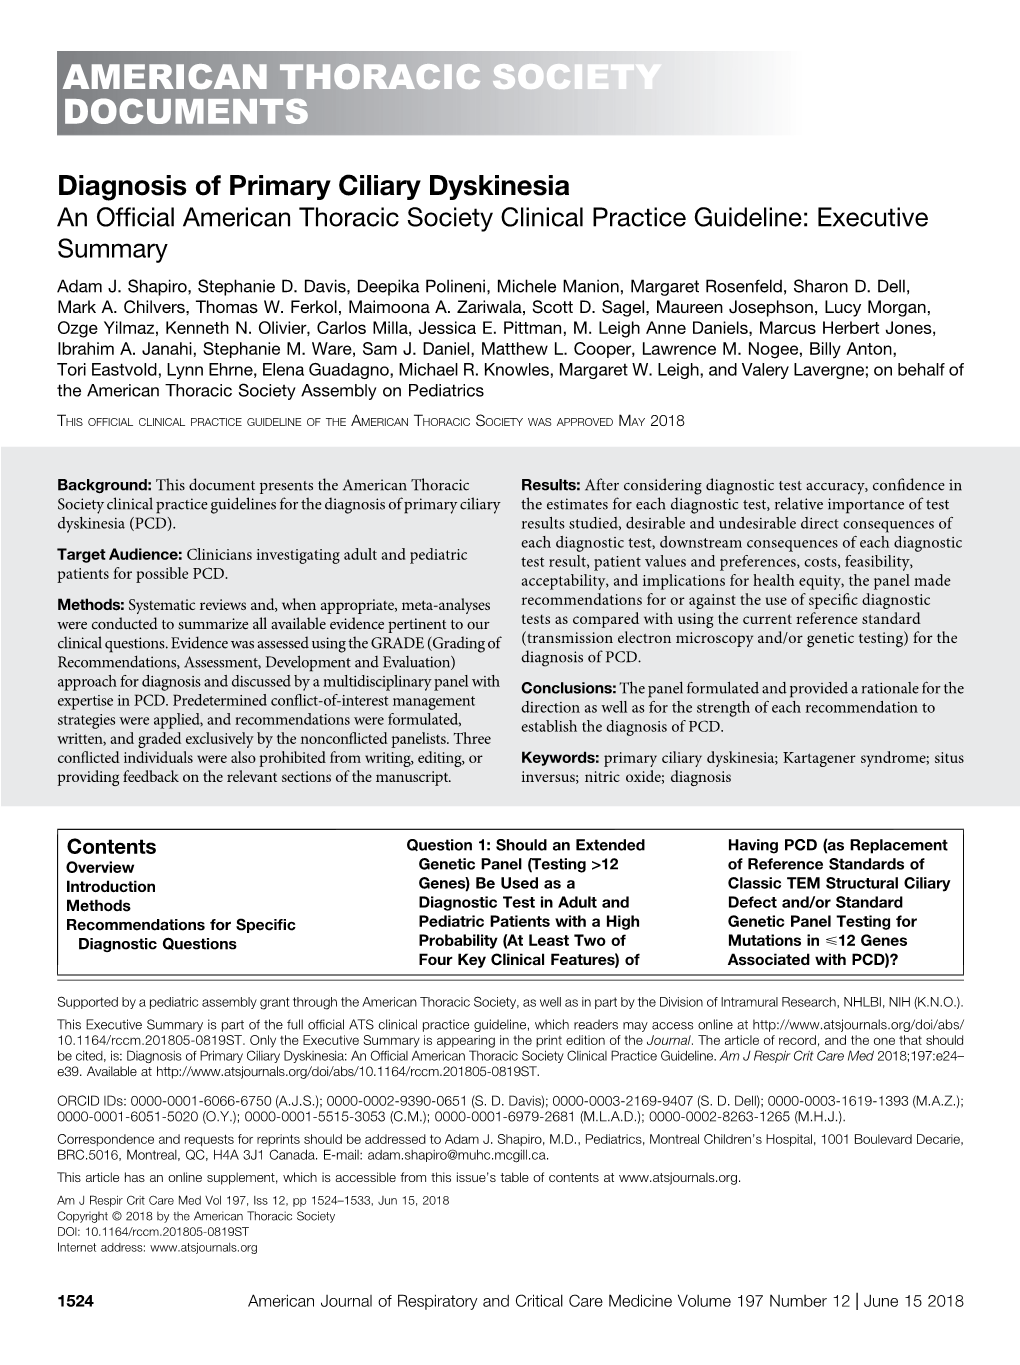 Diagnosis of Primary Ciliary Dyskinesia an Ofﬁcial American Thoracic Society Clinical Practice Guideline: Executive Summary Adam J